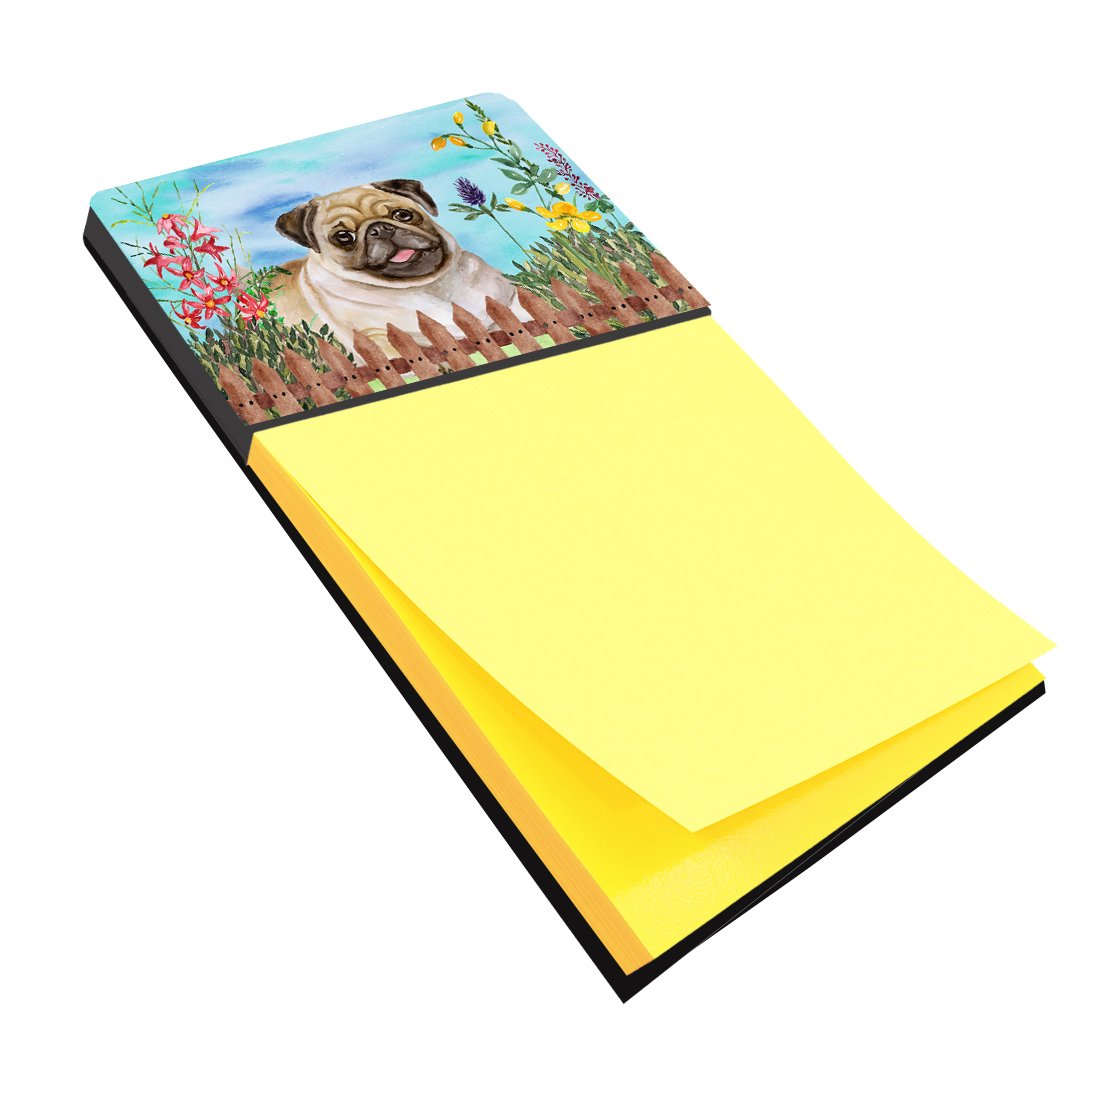 Fawn Pug Spring Sticky Note Holder CK1280SN by Caroline's Treasures